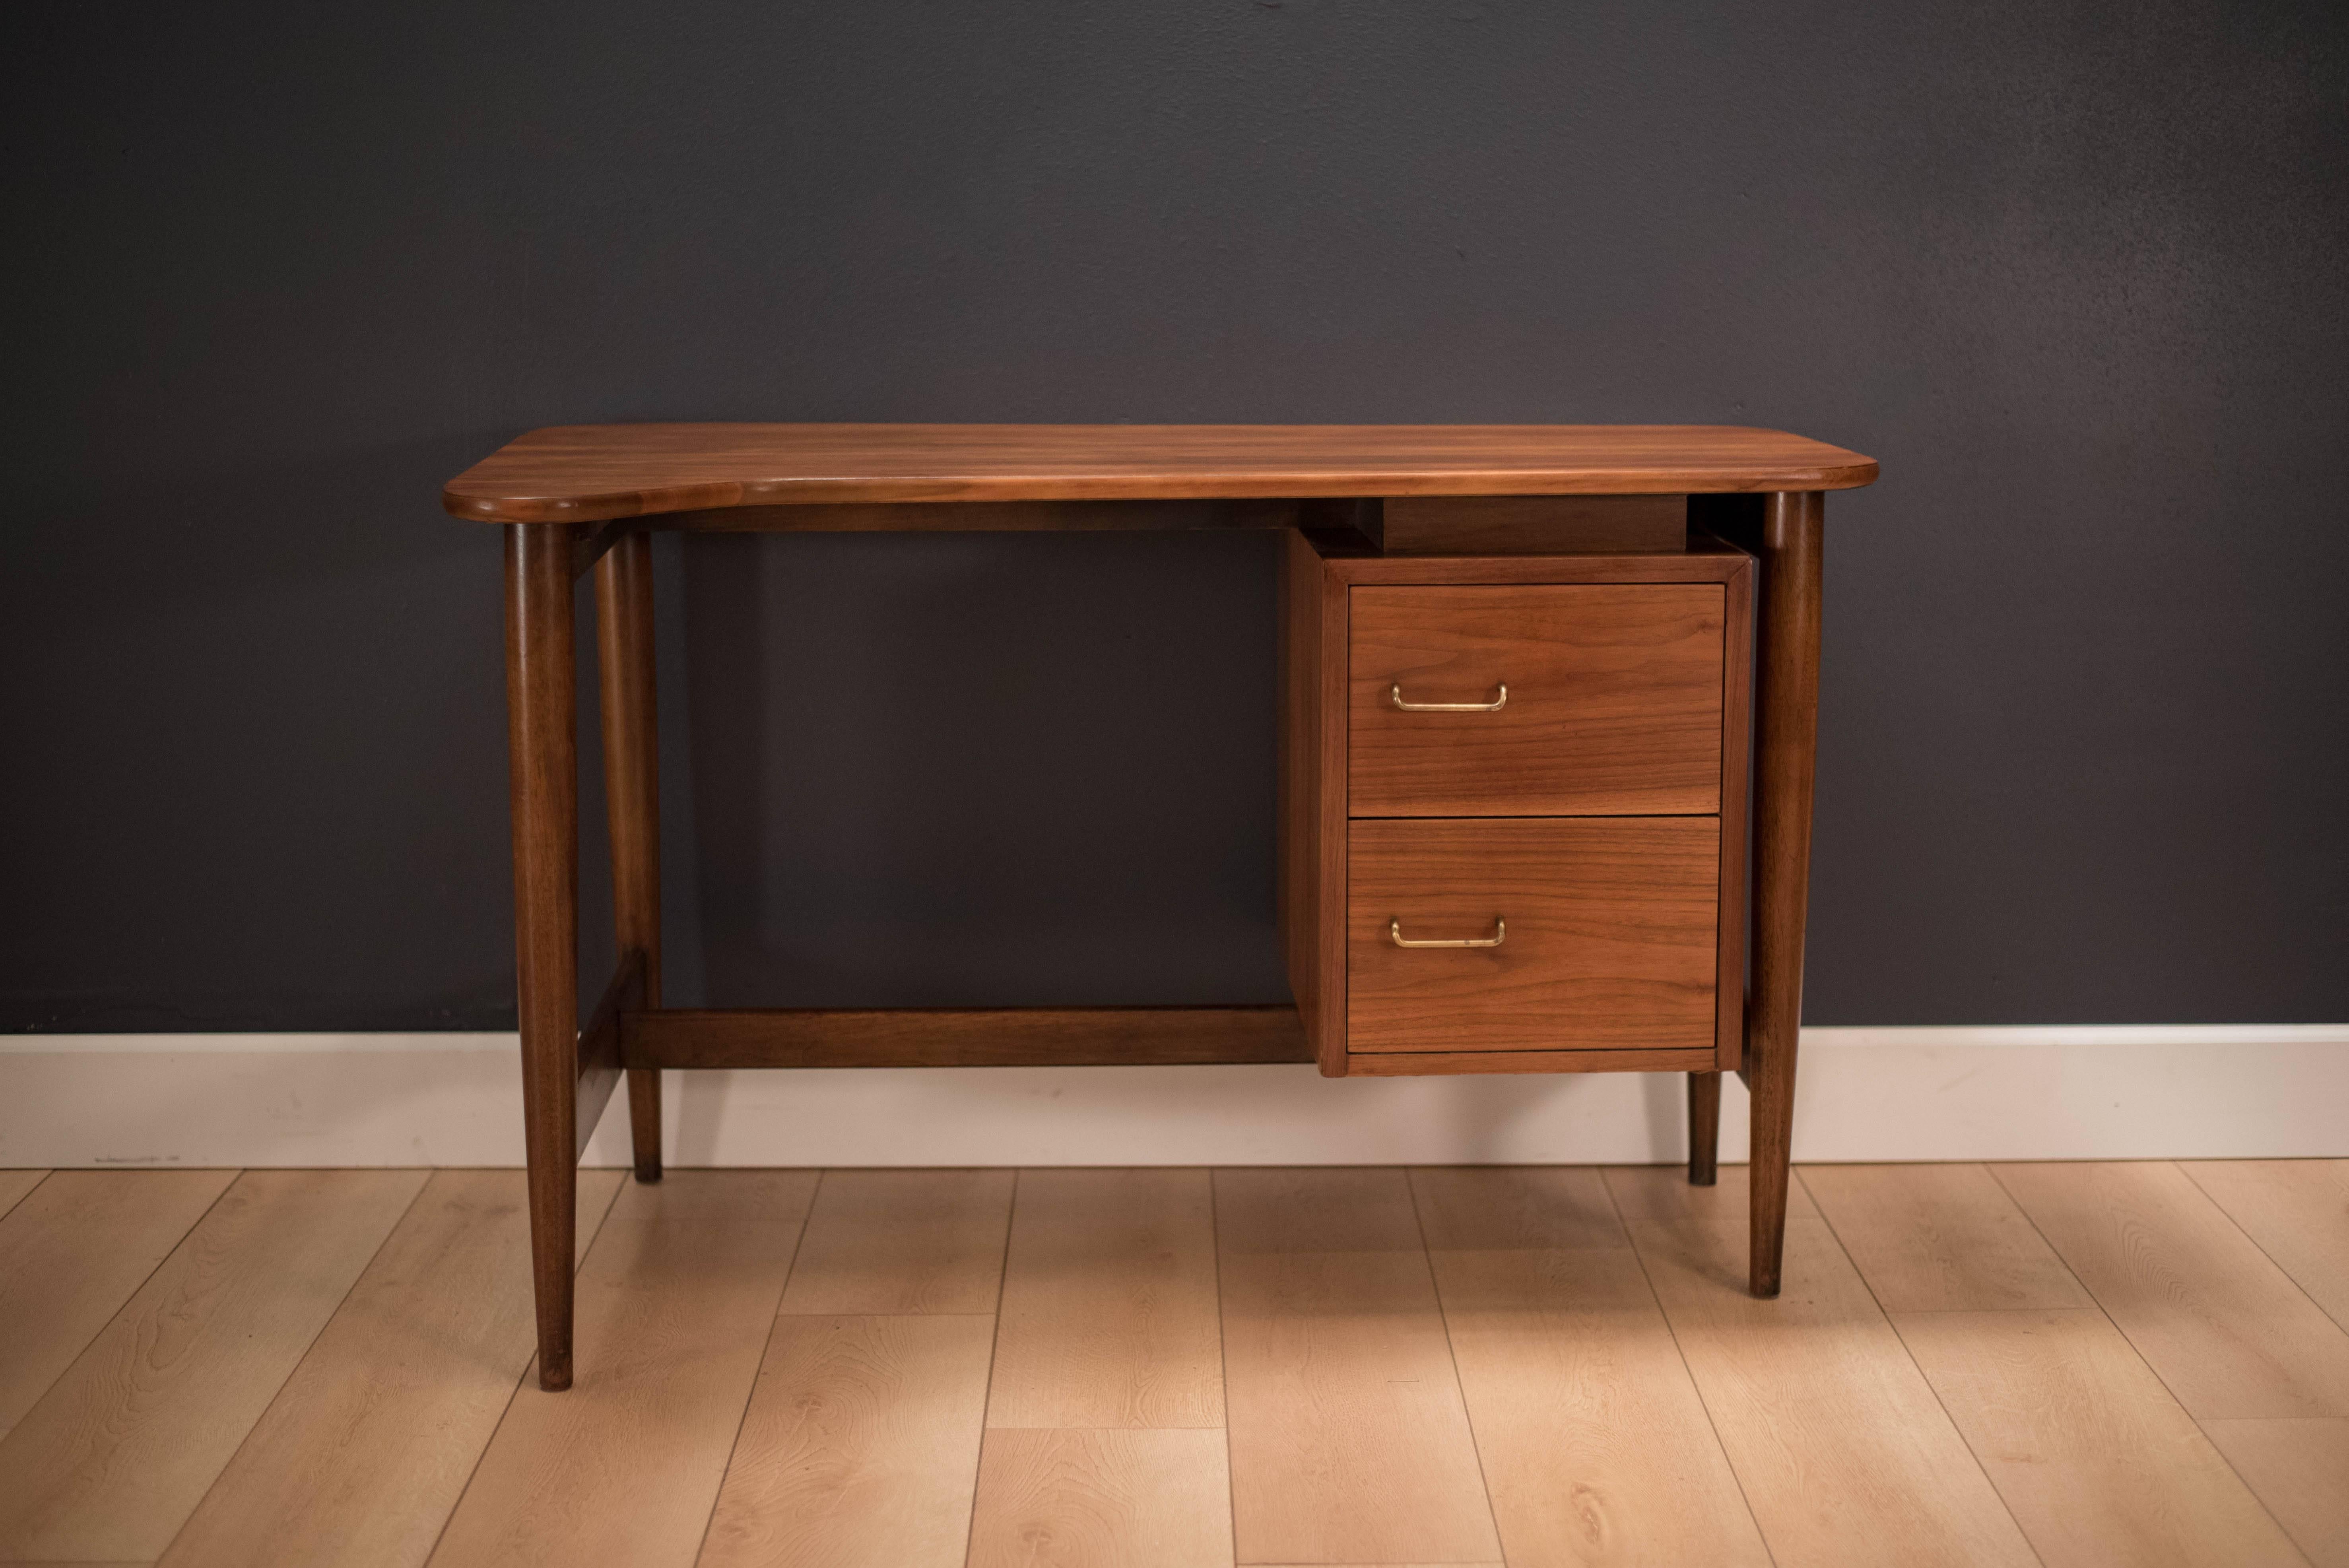 Mid-Century Modern Desk by American of Martinsville in walnut. This piece is from the Dania collection designed by Merton Gershun. Features two drawers with brass handles and a unique boomerang shaped top. 

